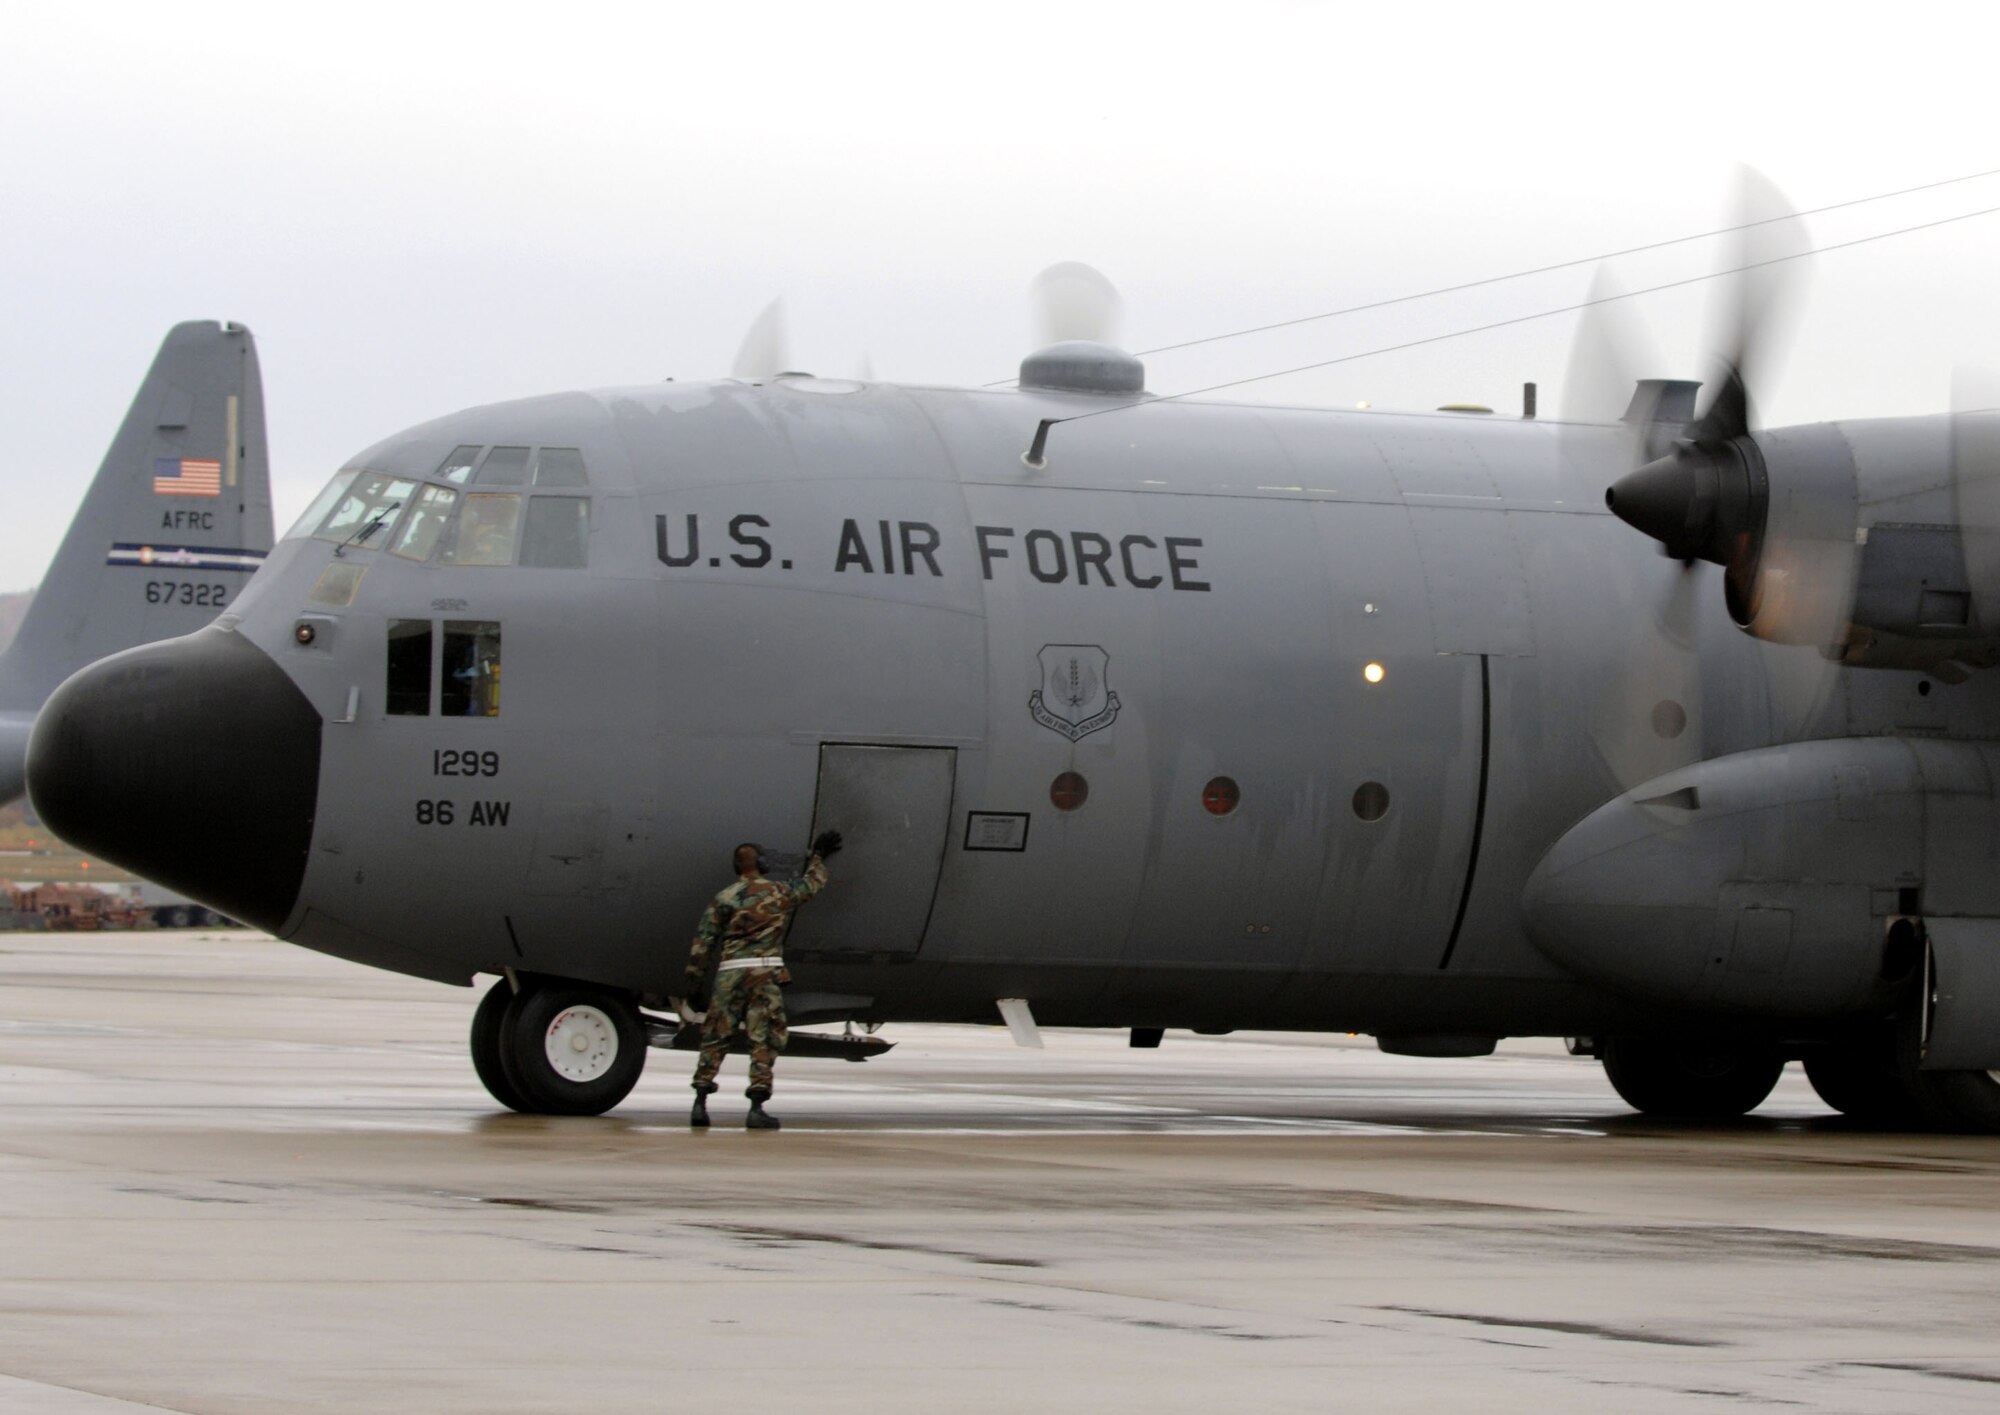 U.S. Air Force Staff Sgt. Nate McAdams, 86th Aircraft Maintenance Squadron crew chief, closes the door of Ramstein's last C-130E Hercules in preparation for final departure on Ramstein Air Base, Germany, Nov. 2, 2009. The C-130E Hercules has provided more than 40 years of airpower to U.S.  Air Forces in Europe, and has been upgraded to the new C-130J Super Hercules as part of revitalizing the Air Force fleet. (U.S. Air Force photo by Airman 1st Class Brittany Perry)